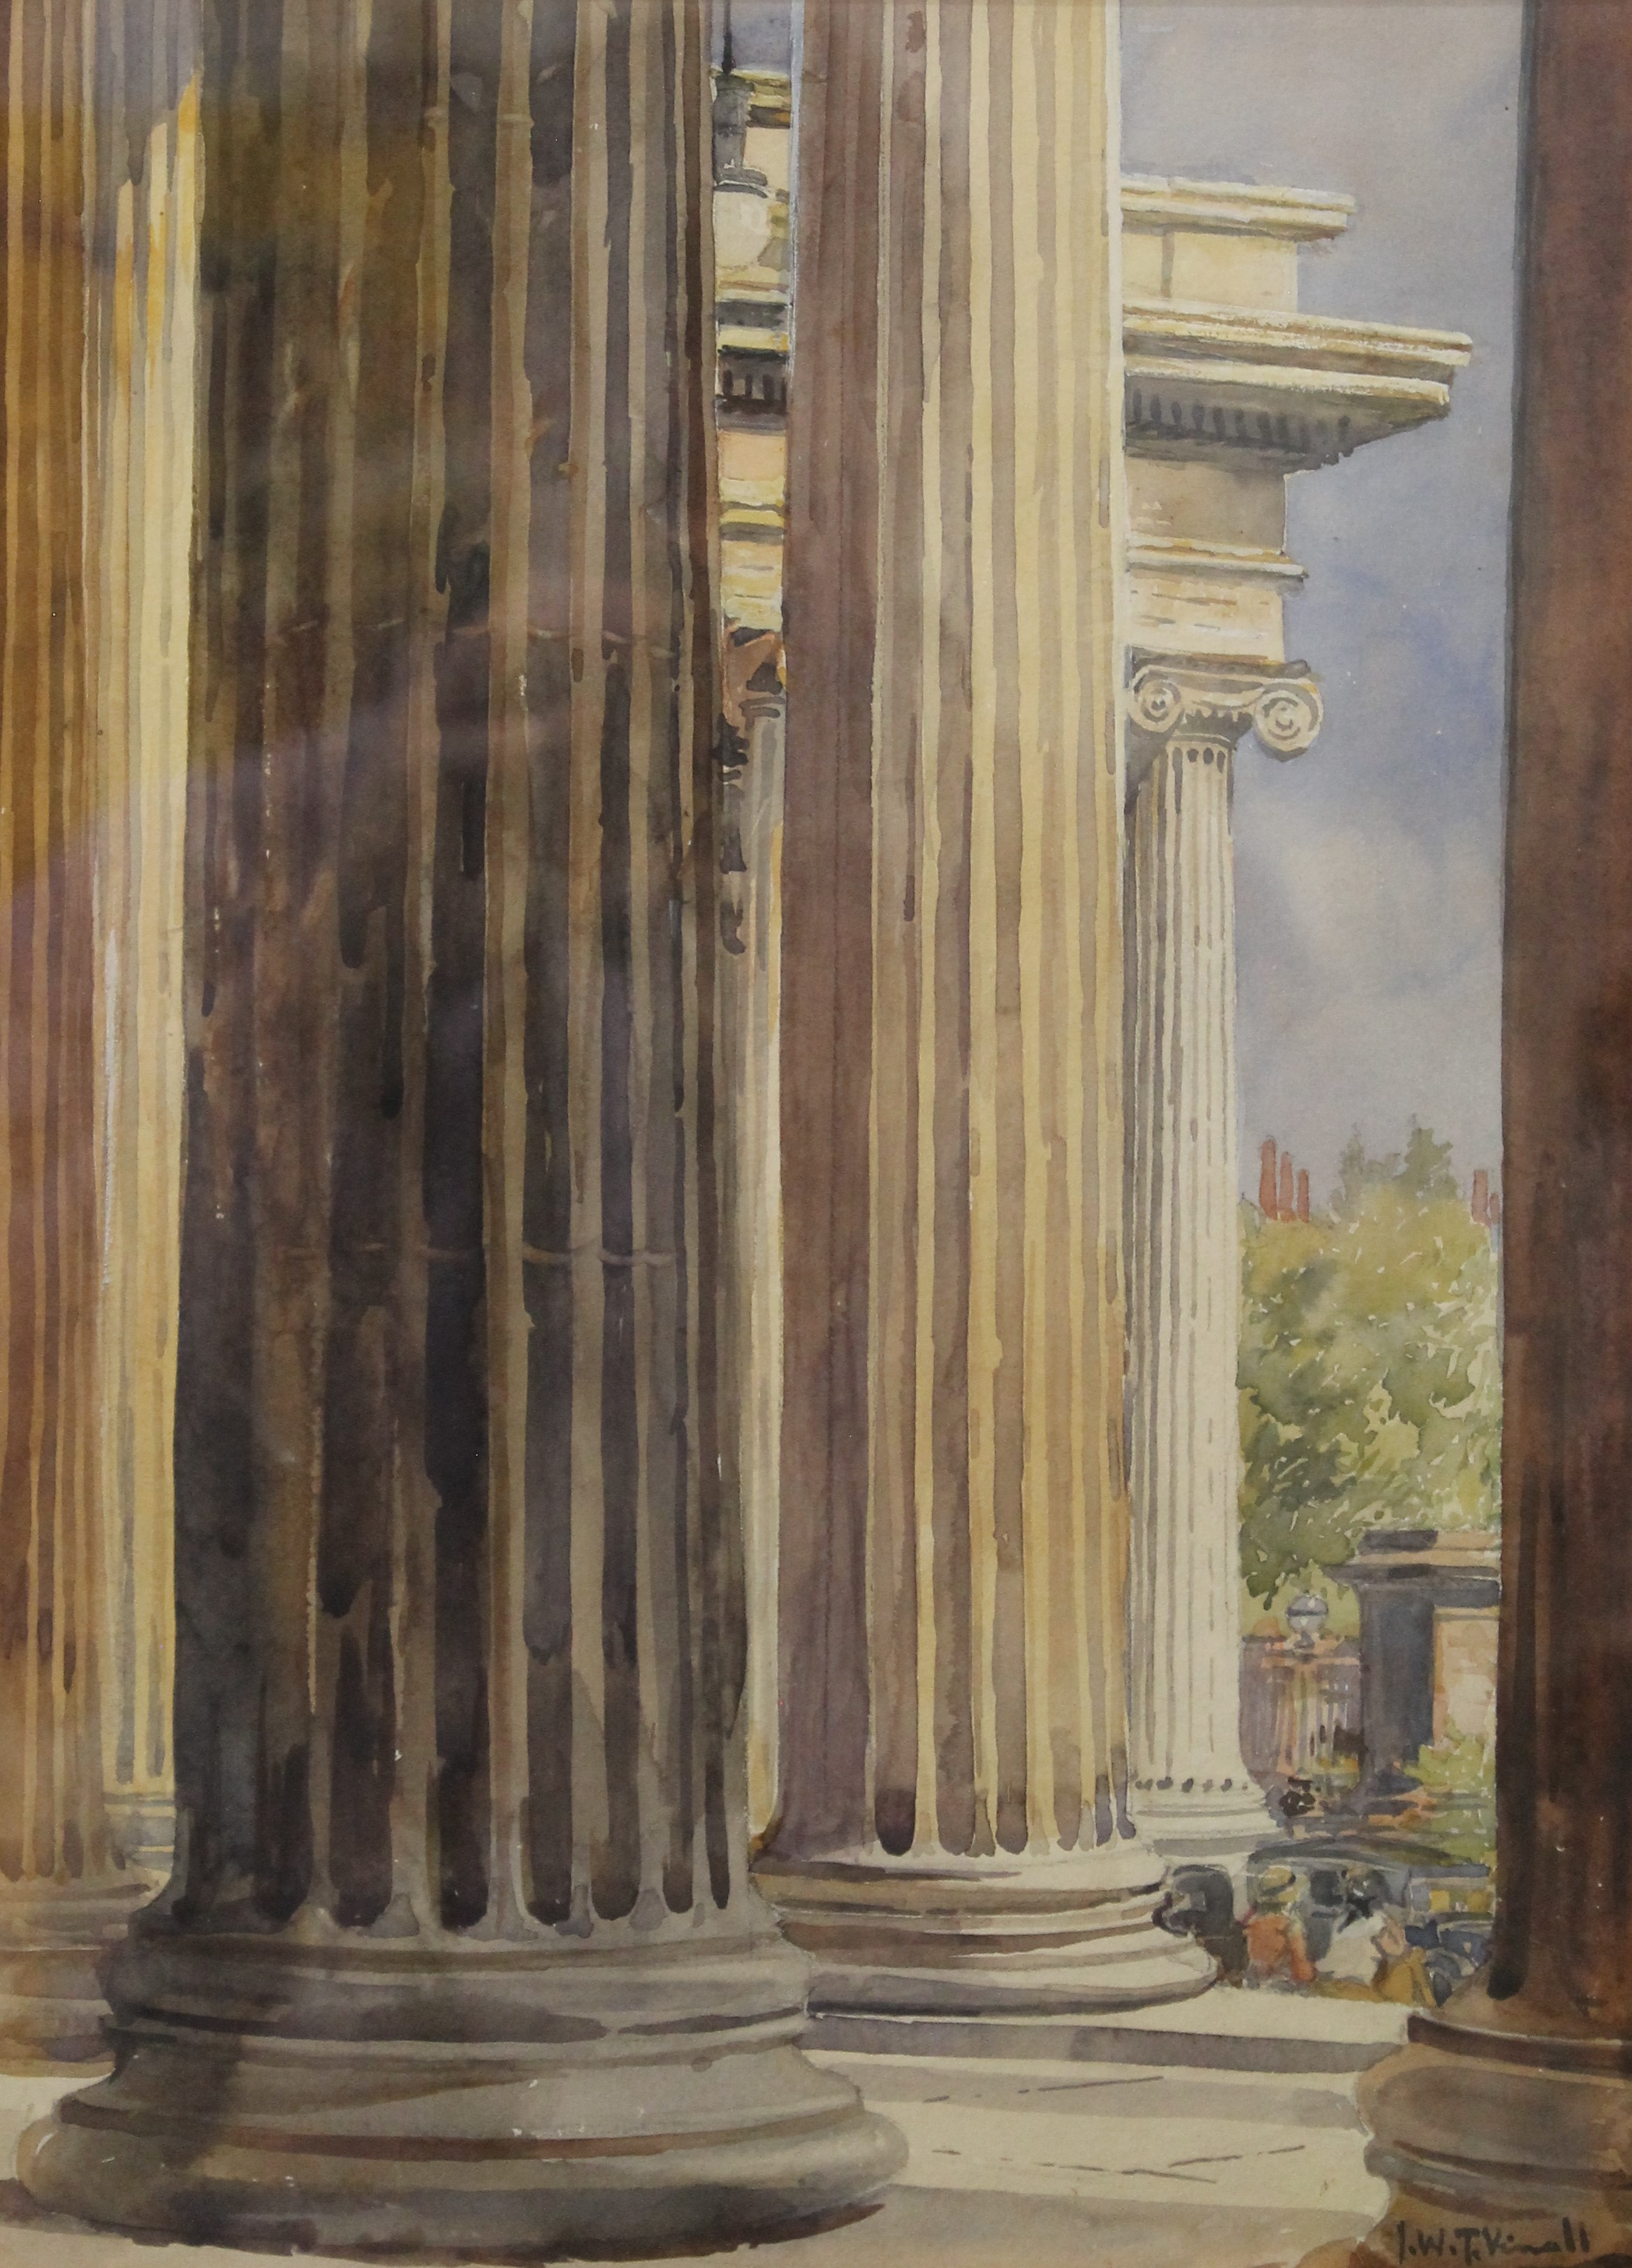 J W T VITALLI, Portico of British Museum, watercolour, signed, framed and glazed. 25 x 34 cm.